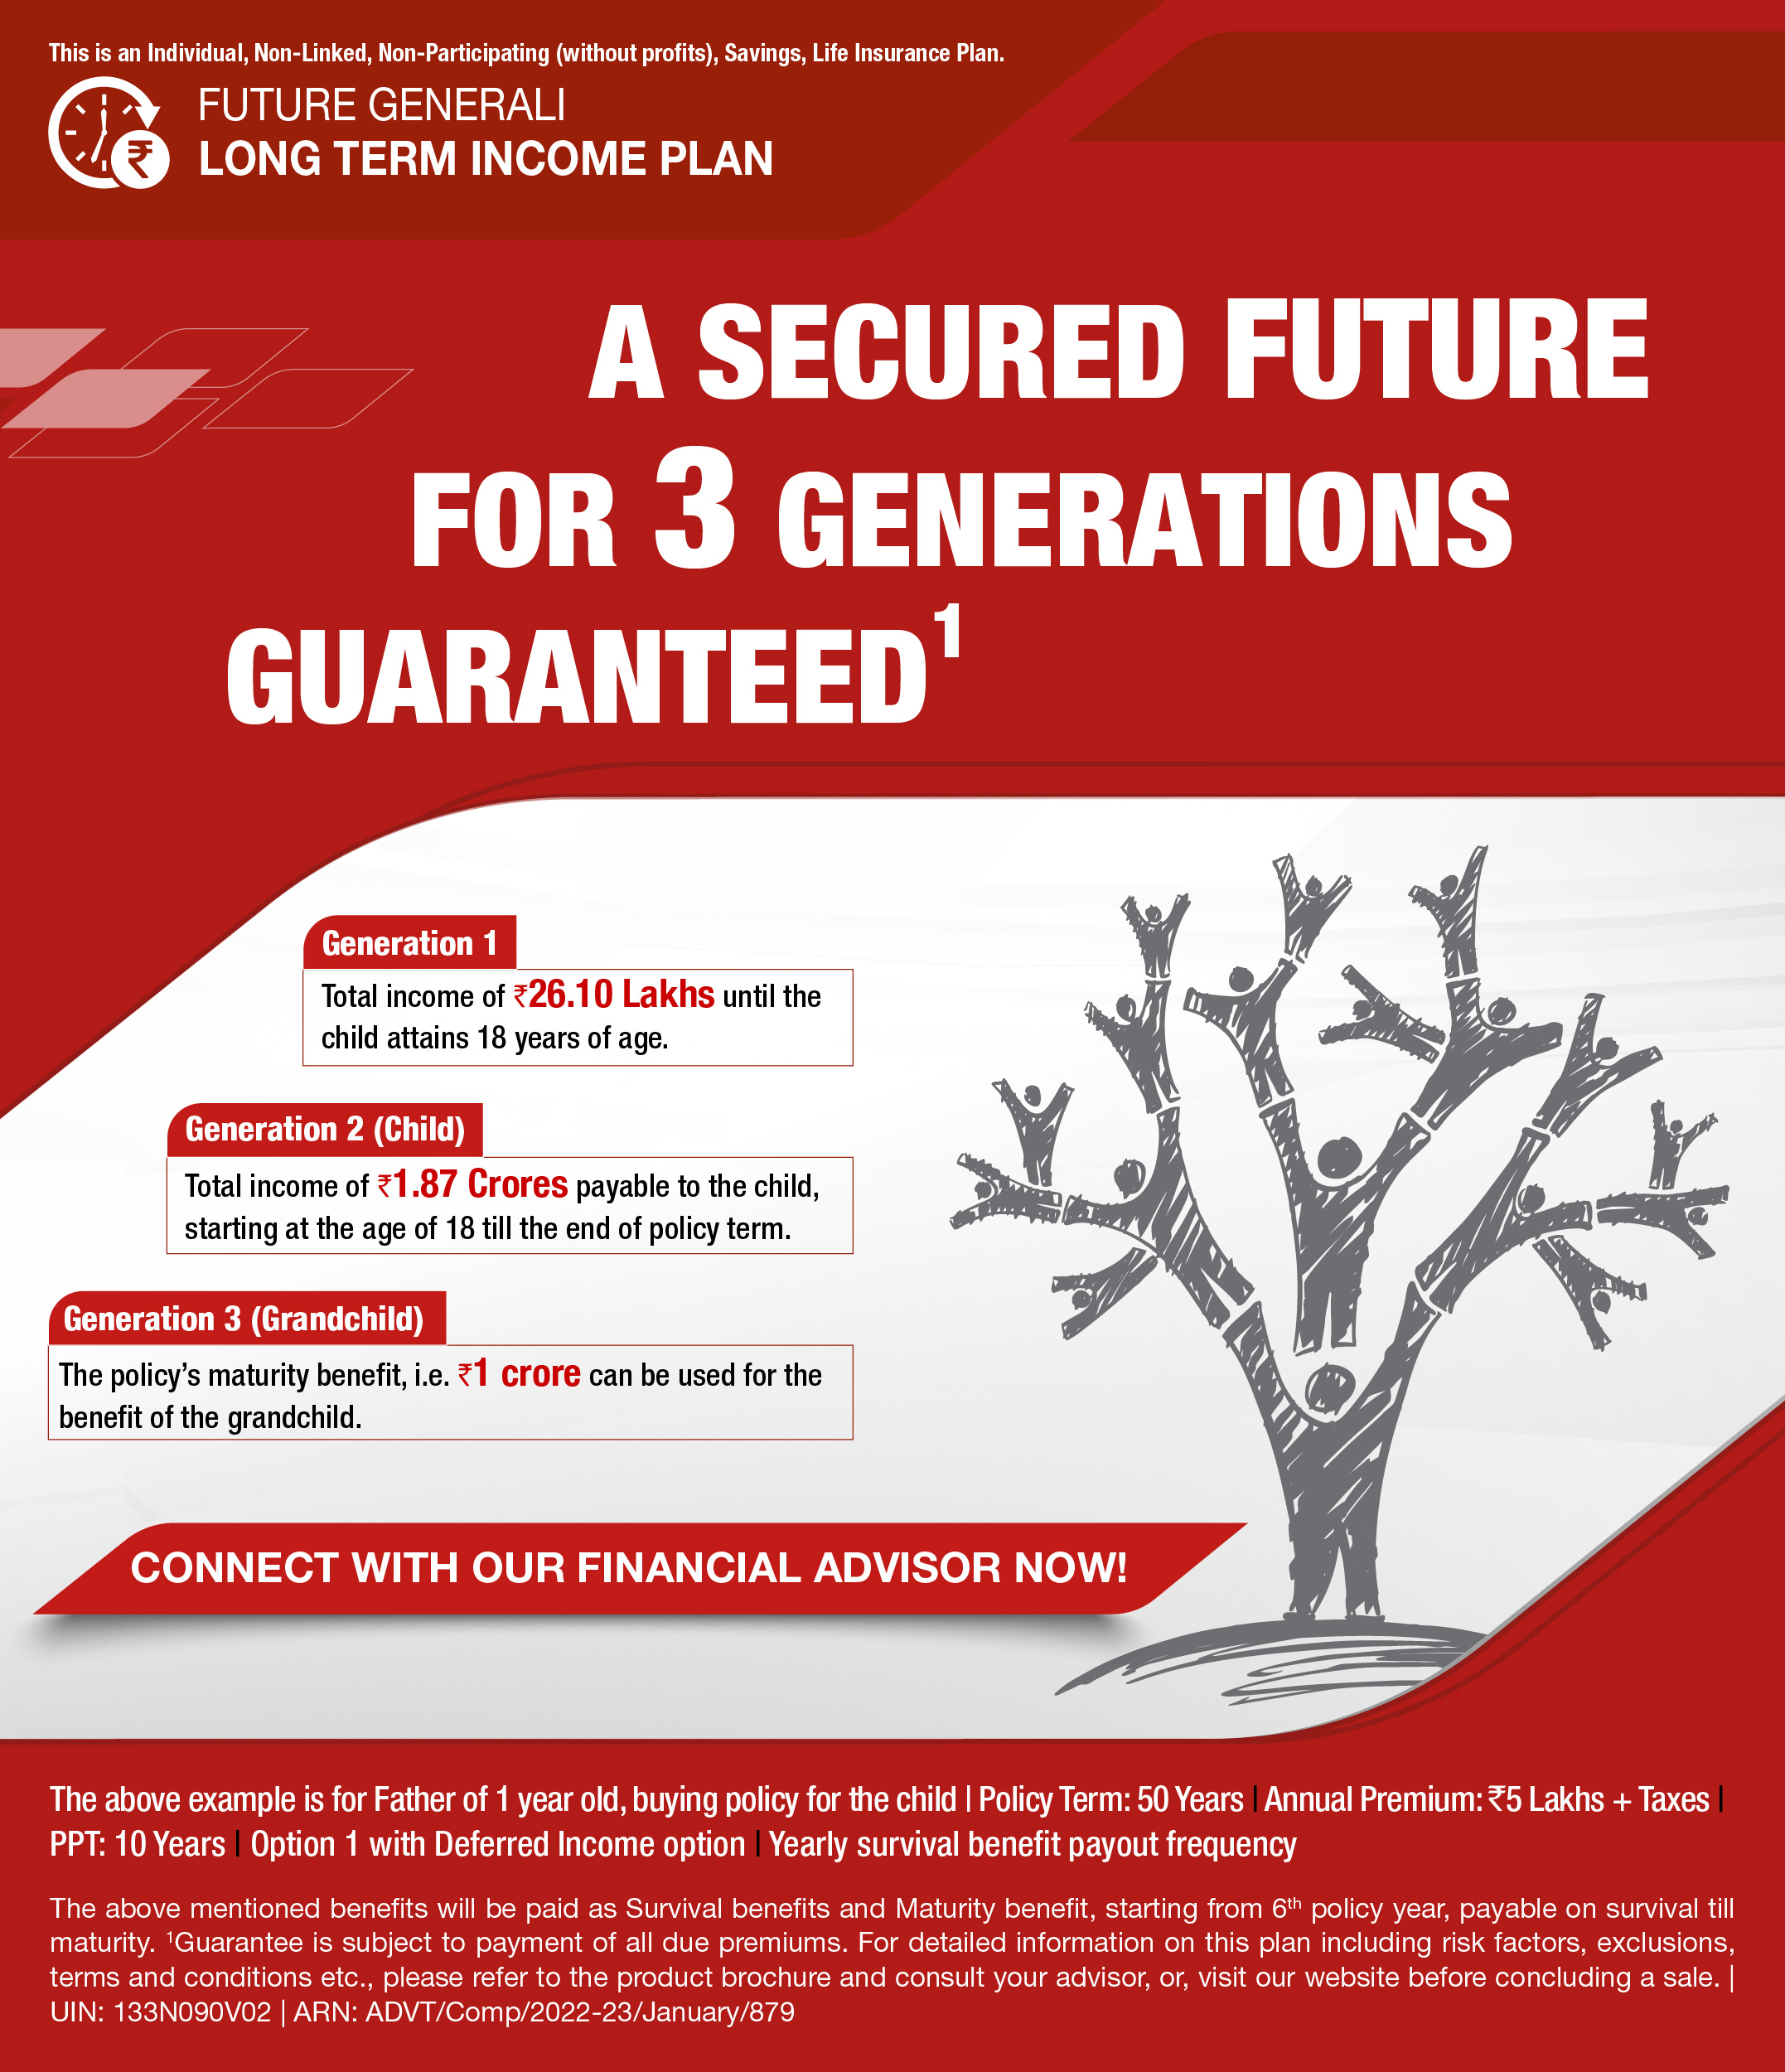 A secured future for 3 generations guaranteed